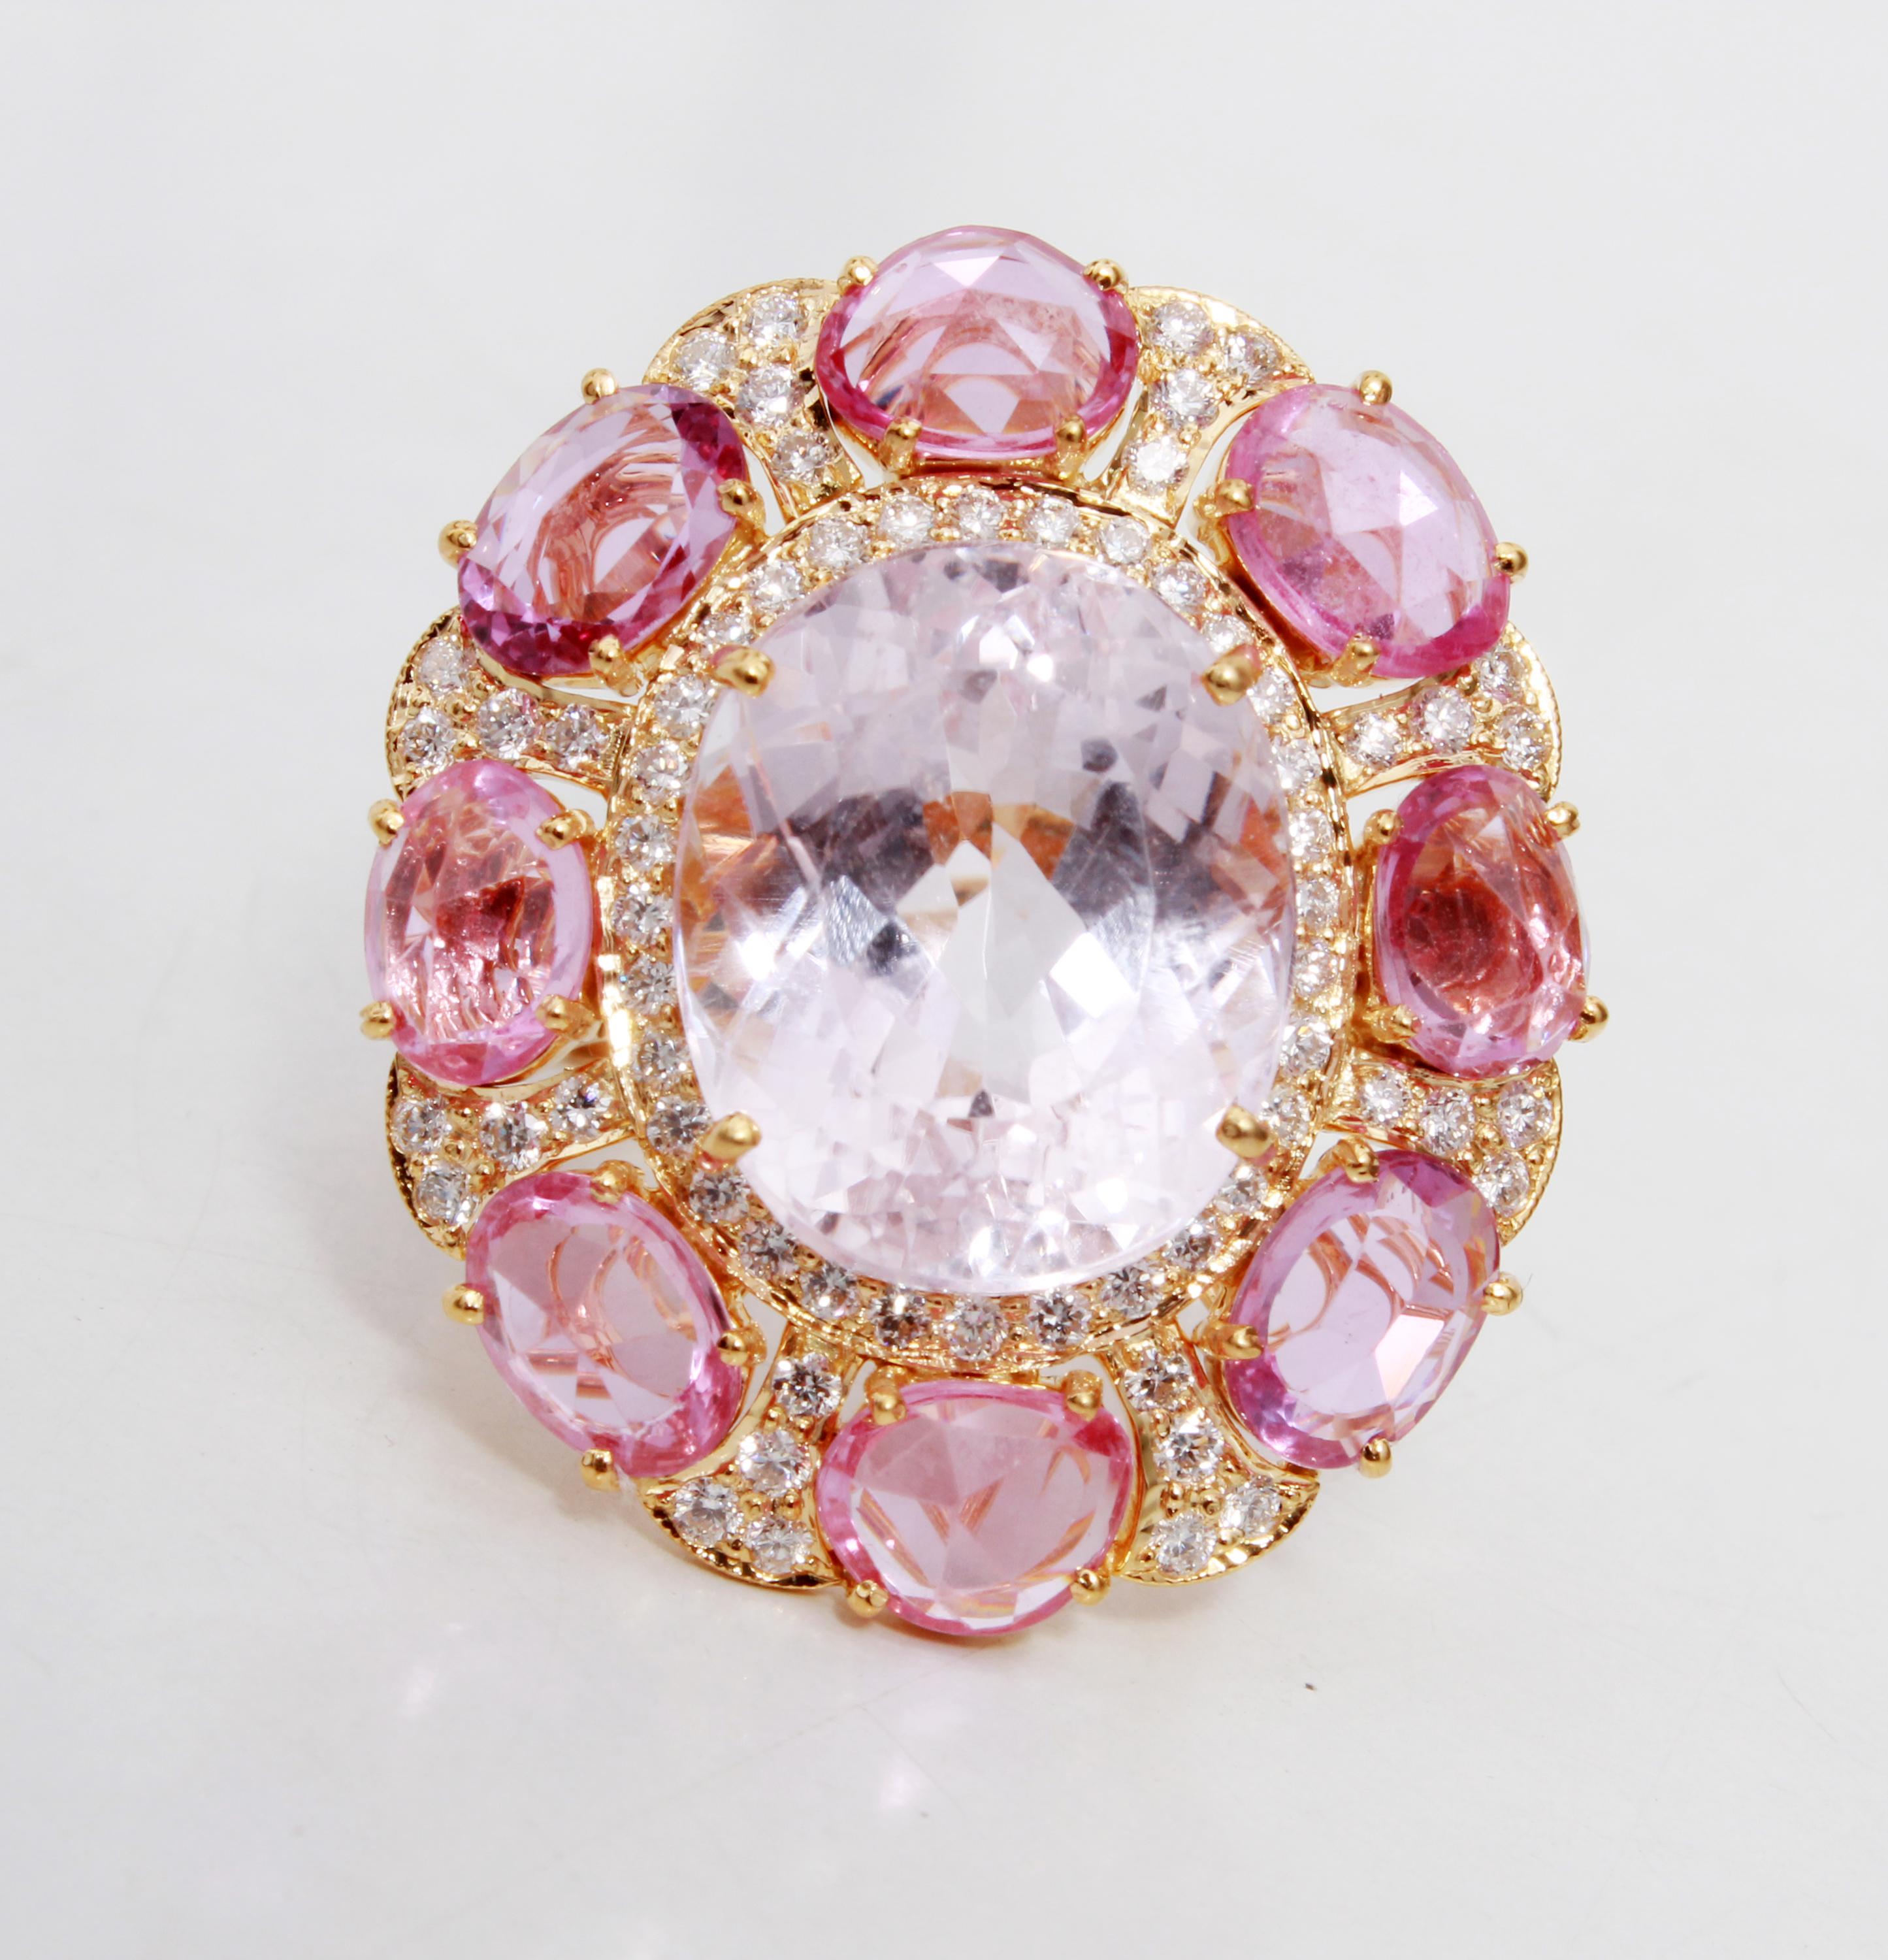 This lustrous ring has a 12.90 carats kunzite that is mounted in the center of the ring and with that 8 pieces of rose cut pink sapphires weighing 6.15 carats.
Ring also embellished with 74 pieces of round cut white diamonds weighing 1.21 carats. 